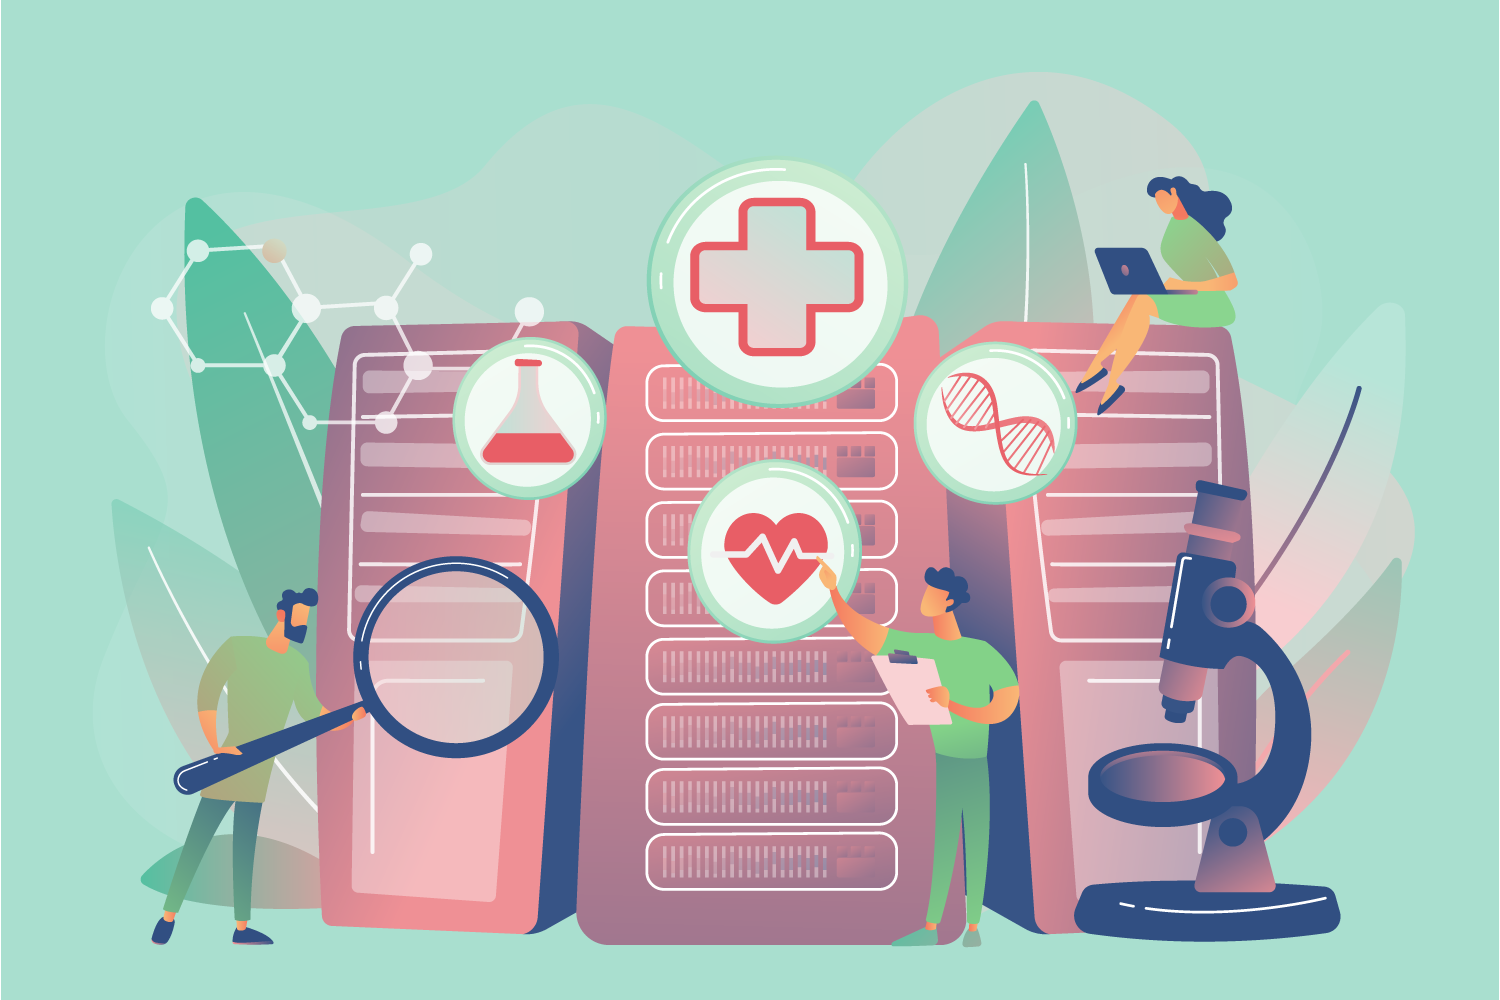 Top 5 Medical & Healthcare Industry Trends for 2020